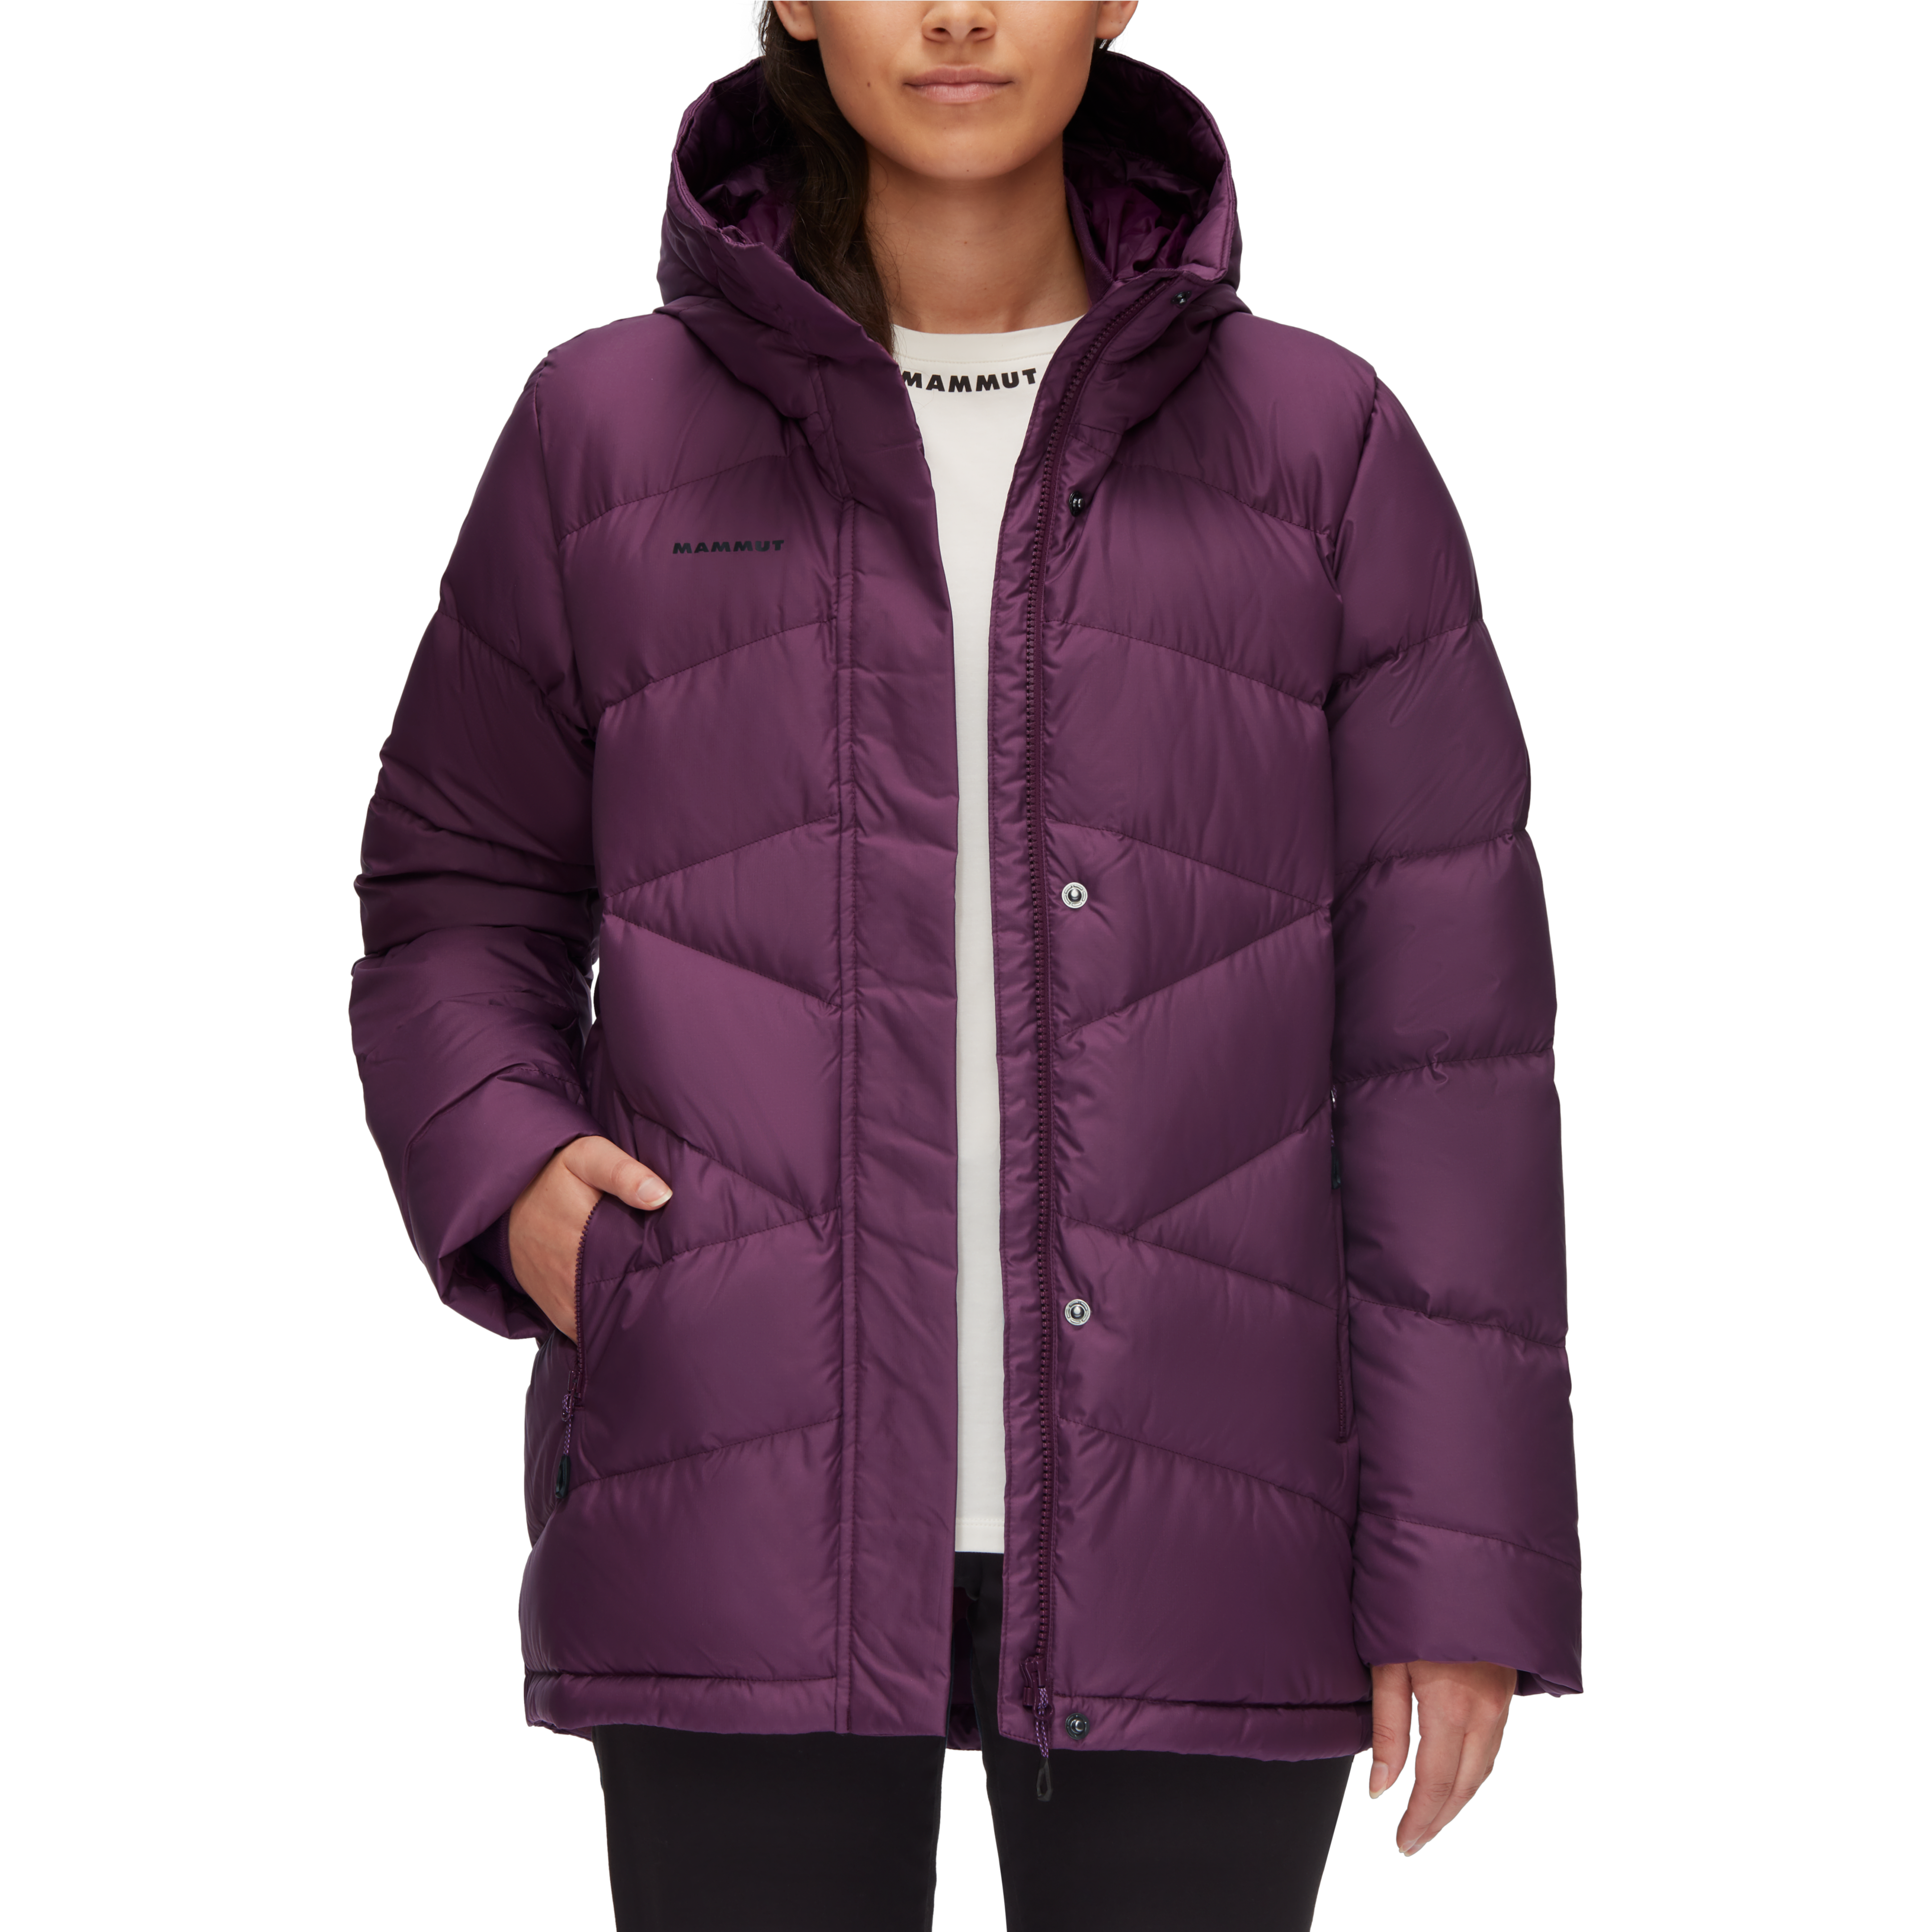 Fedoz IN Hooded Jacket Women product image